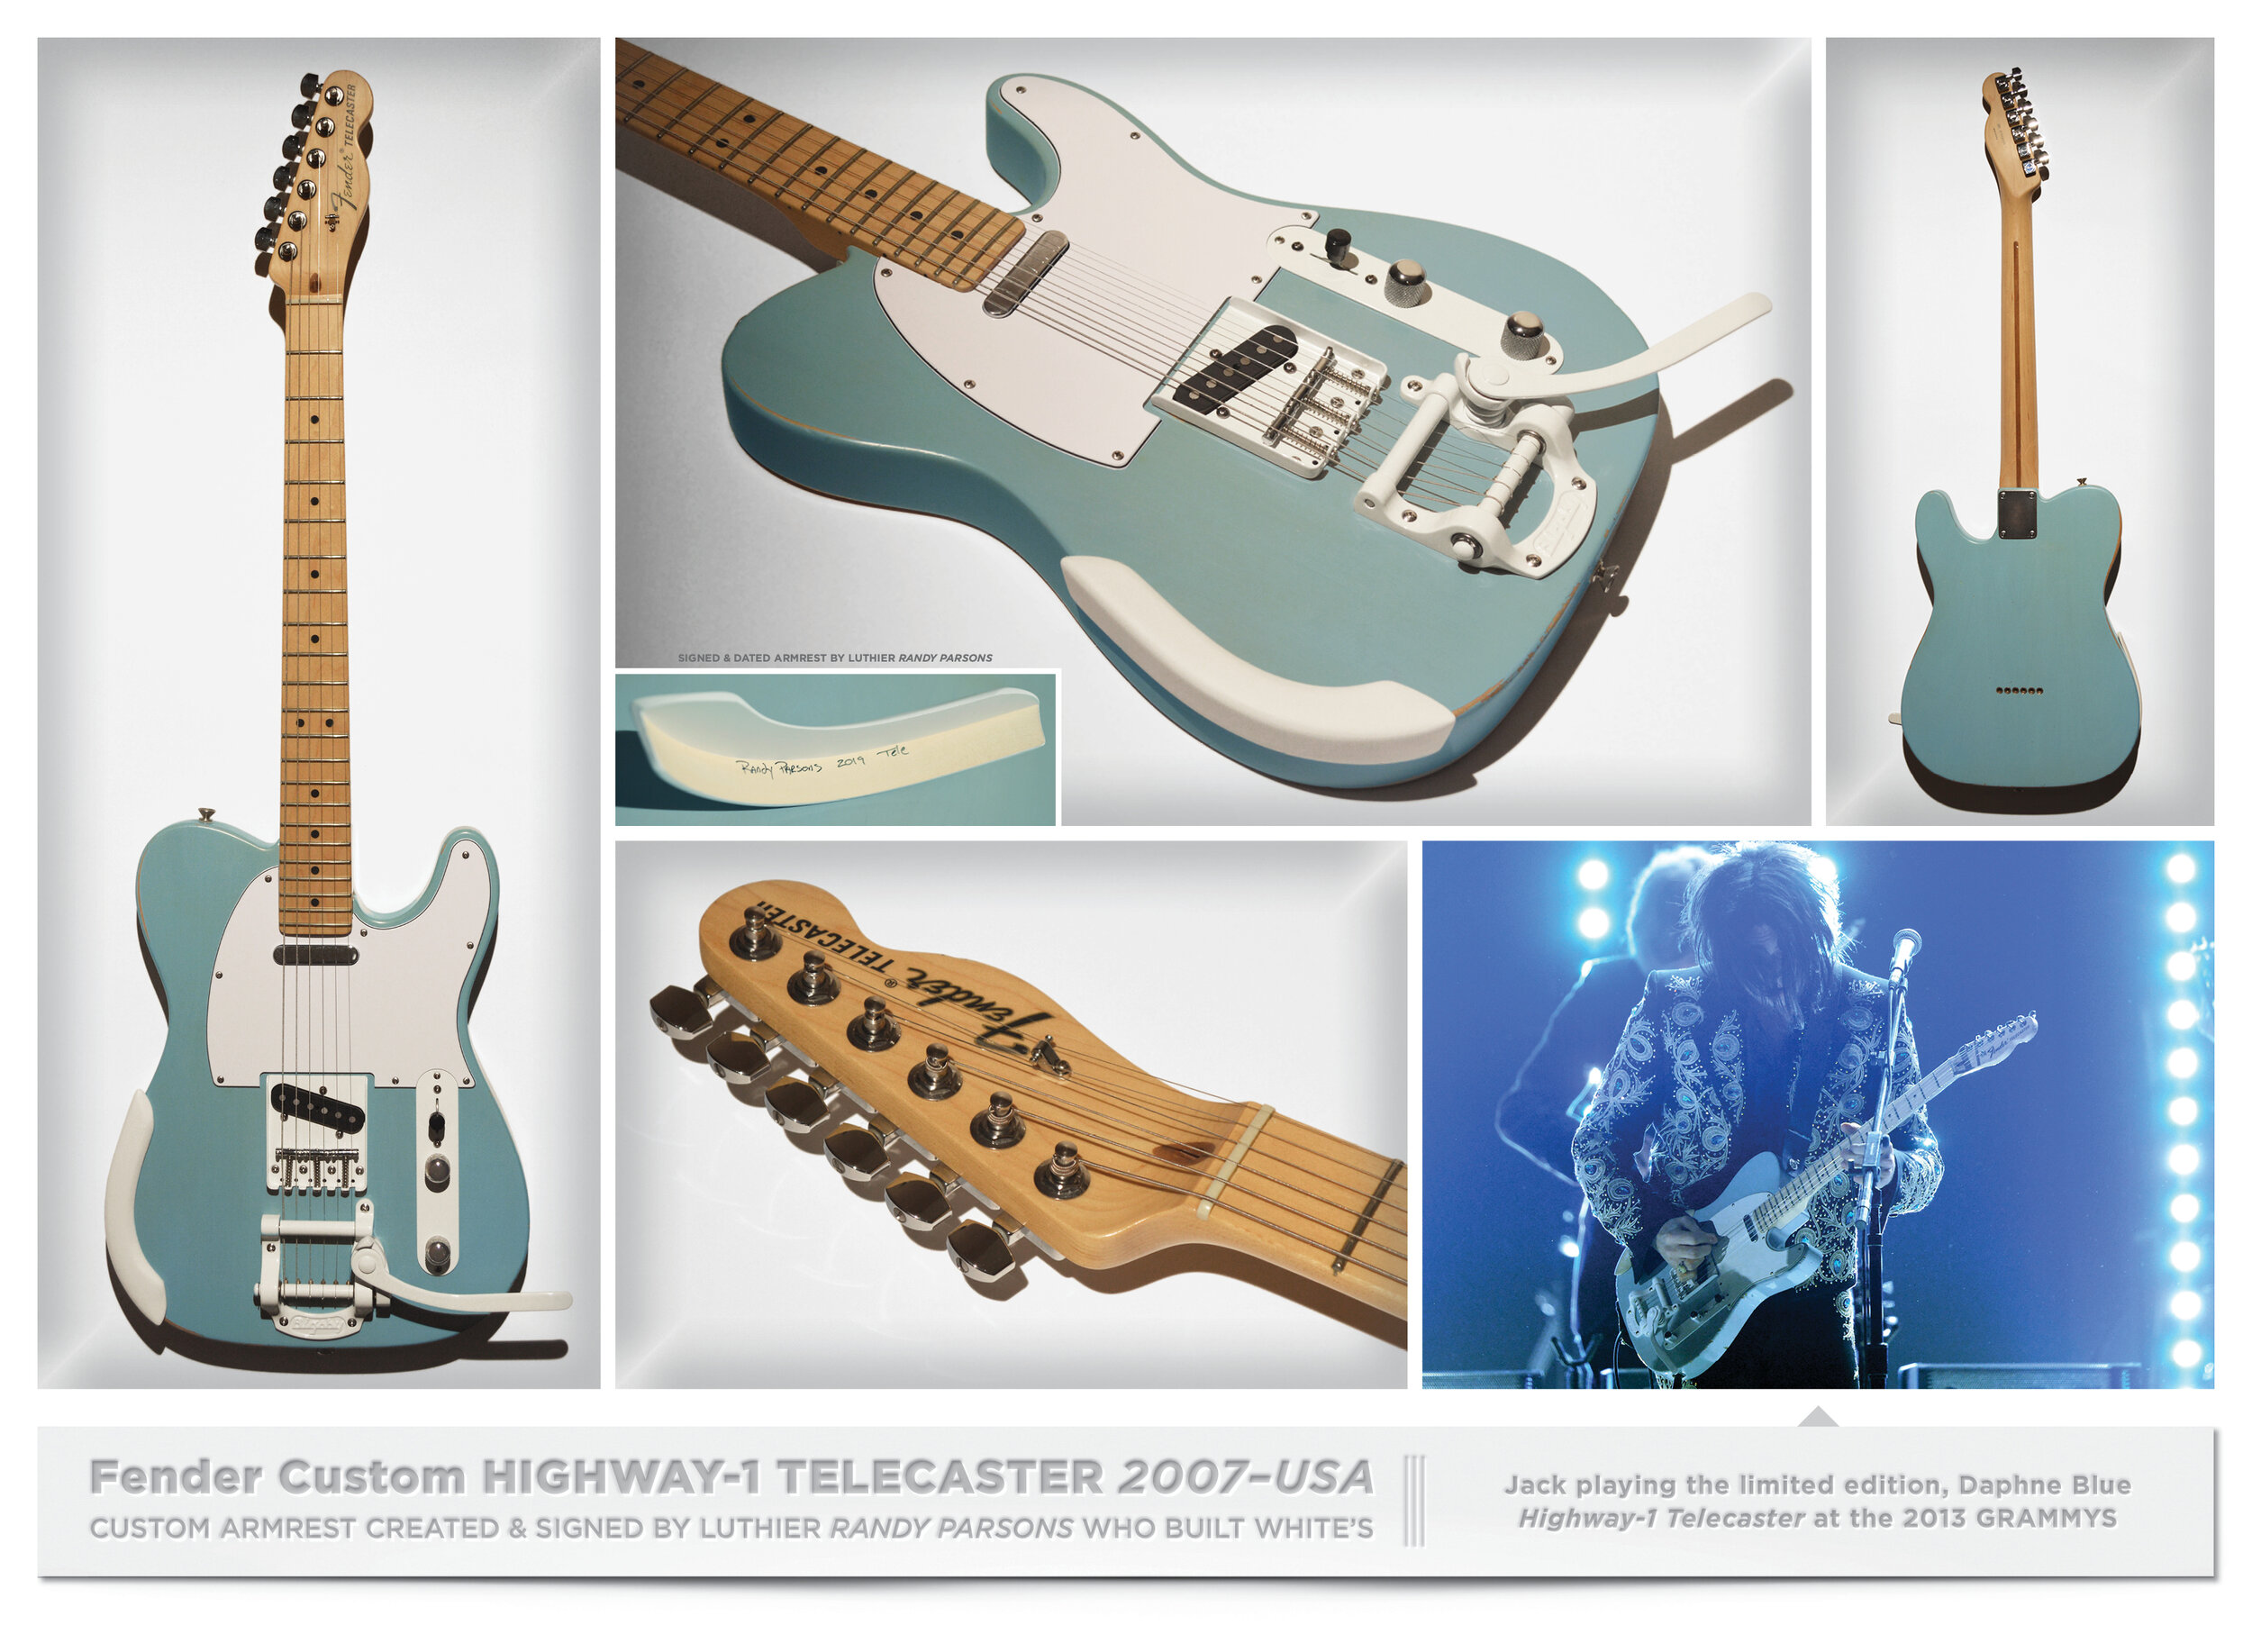 11 Fender Custom HIGHWAY-1 TELECASTER 2007–USA THE JACK WHITE GUITAR COLLECTION FINAL LAYOUT11.jpg